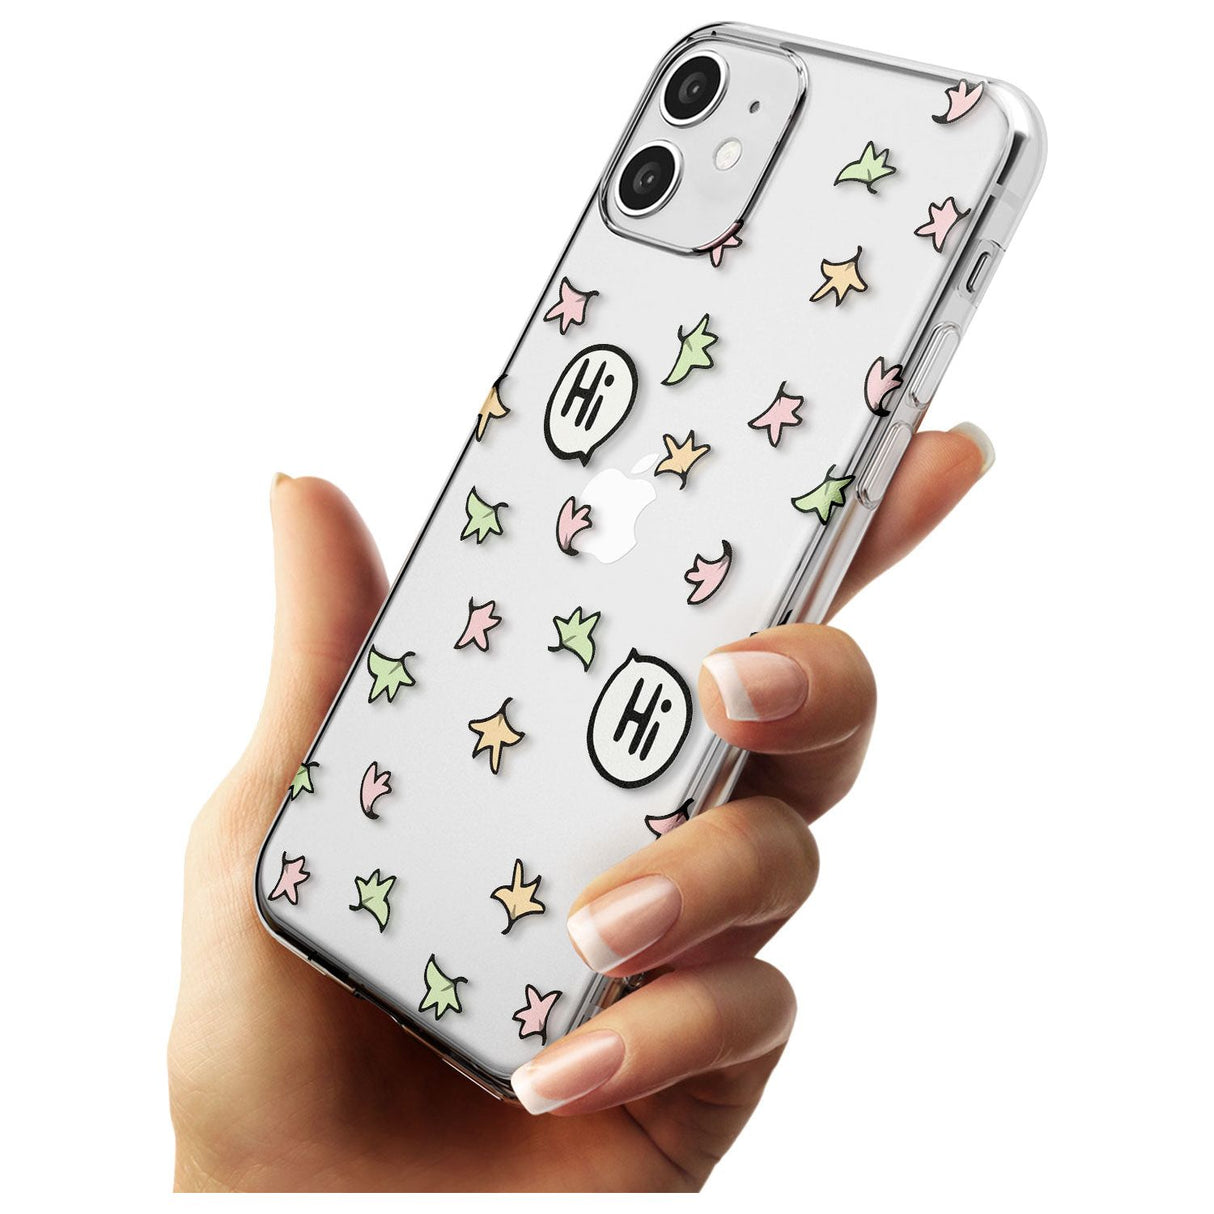 Heartstopper Leaves Pattern Slim TPU Phone Case for iPhone 11